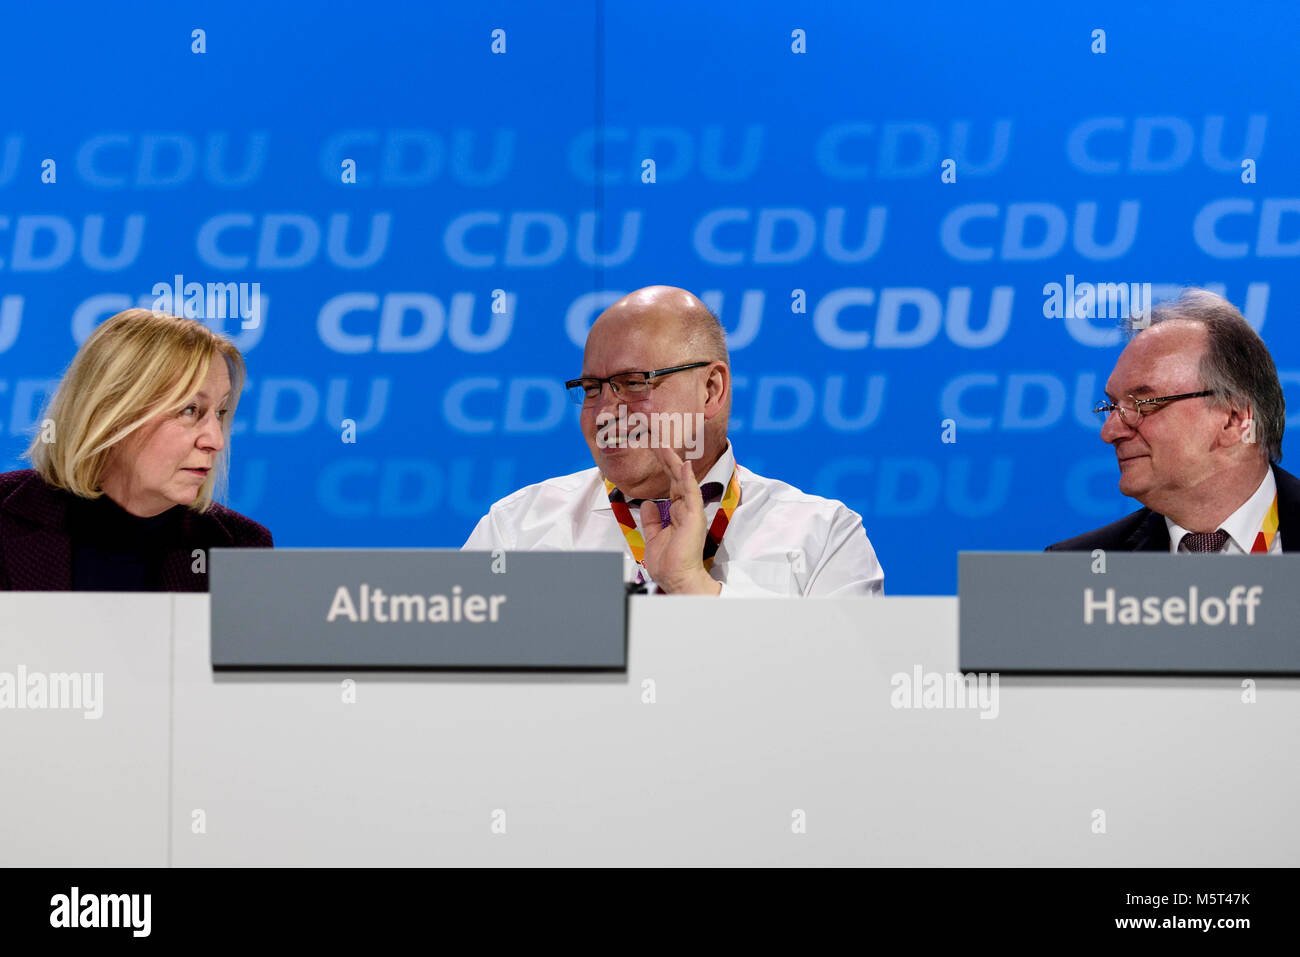 Berlin, Germany. 26th Feb, 2018. (L-R) Federal Minister of Education and Research Johanna Wanka (CDU), Head of the Federal Chancellery and Federal Minister of Finance Peter Altmaier (CDU) and Prime Minister of Saxony-Anhalt Reiner Haseloff (CDU) during the 30th congress of the CDU. The CDU votes today at the party convention in Berlin on the coalition agreement negotiated with the CSU and the SPD. Credit: 20180226 Heine 30CDUParteitag 9558.jpg/SOPA Images/ZUMA Wire/Alamy Live News Stock Photo